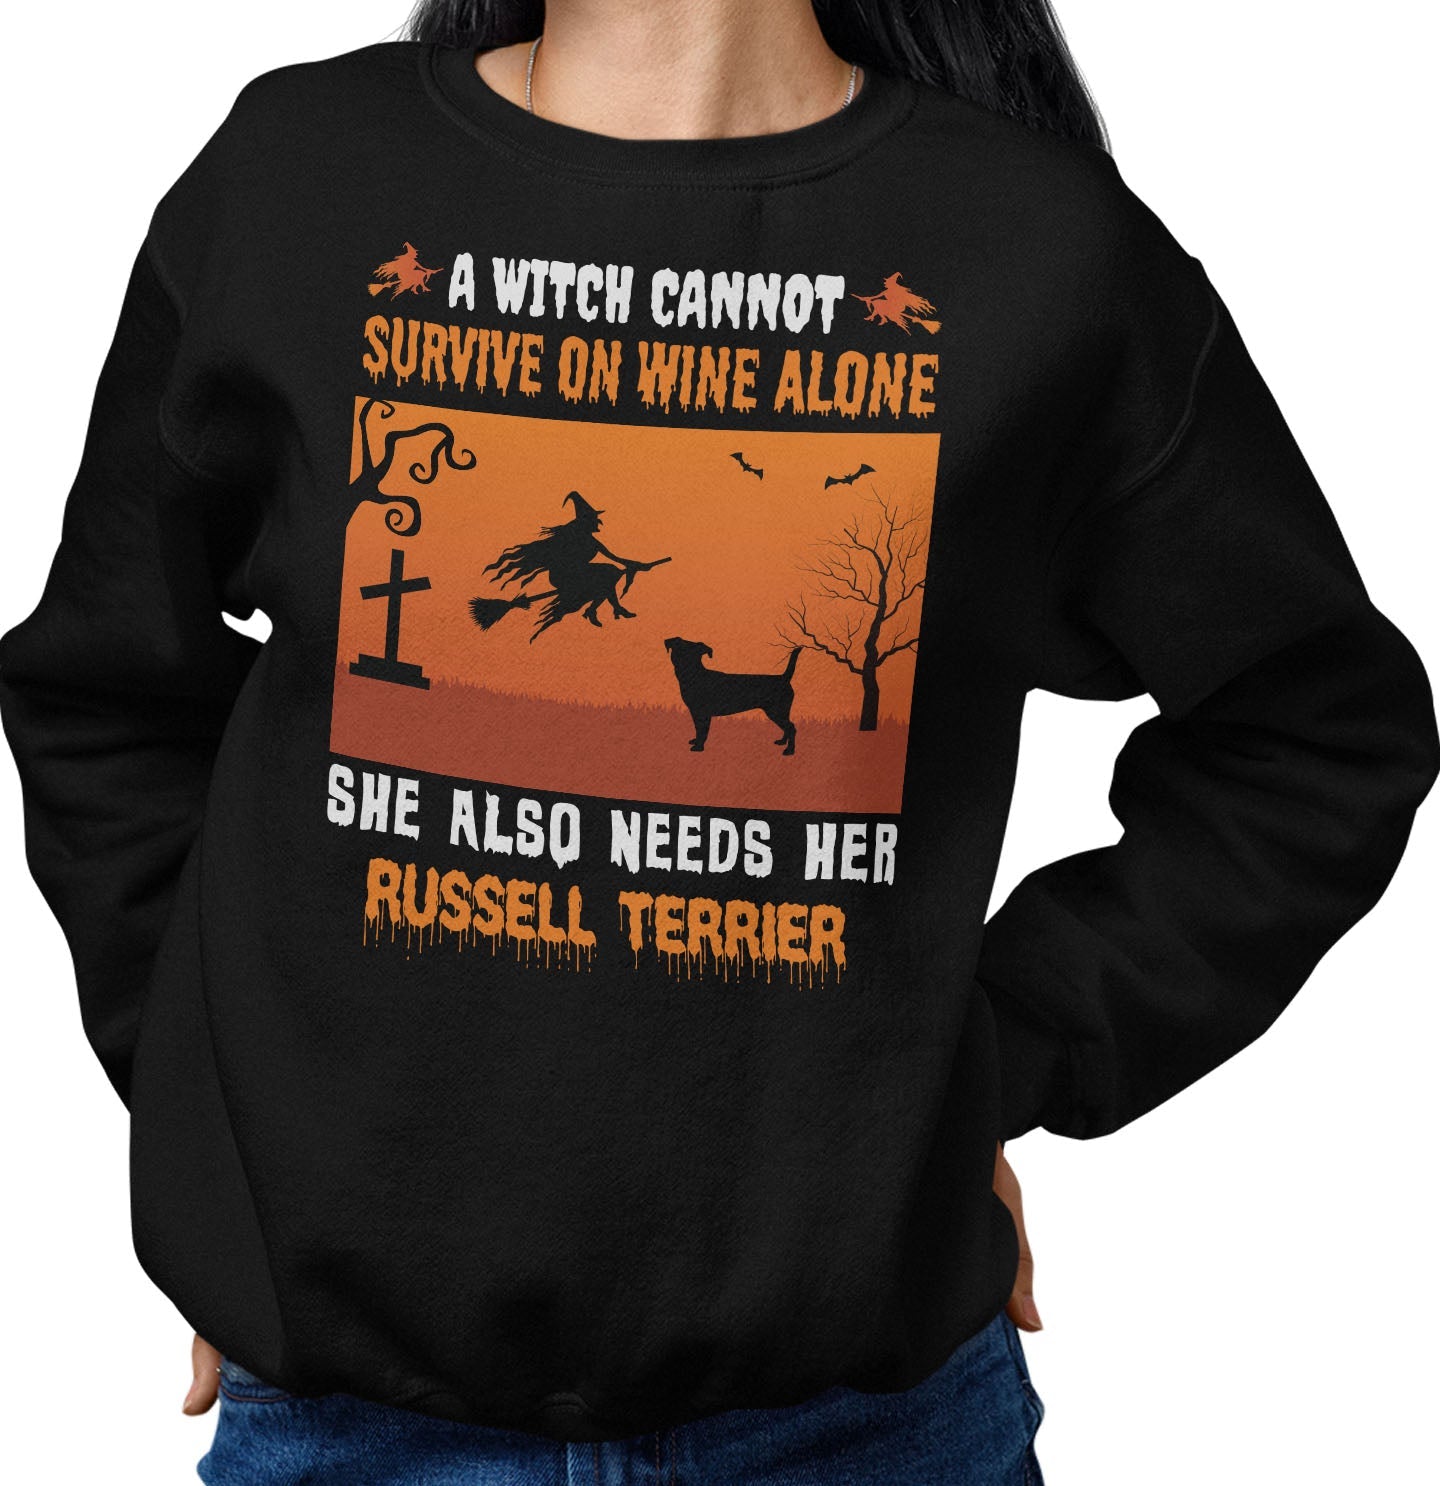 A Witch Needs Her Russell Terrier - Adult Unisex Crewneck Sweatshirt